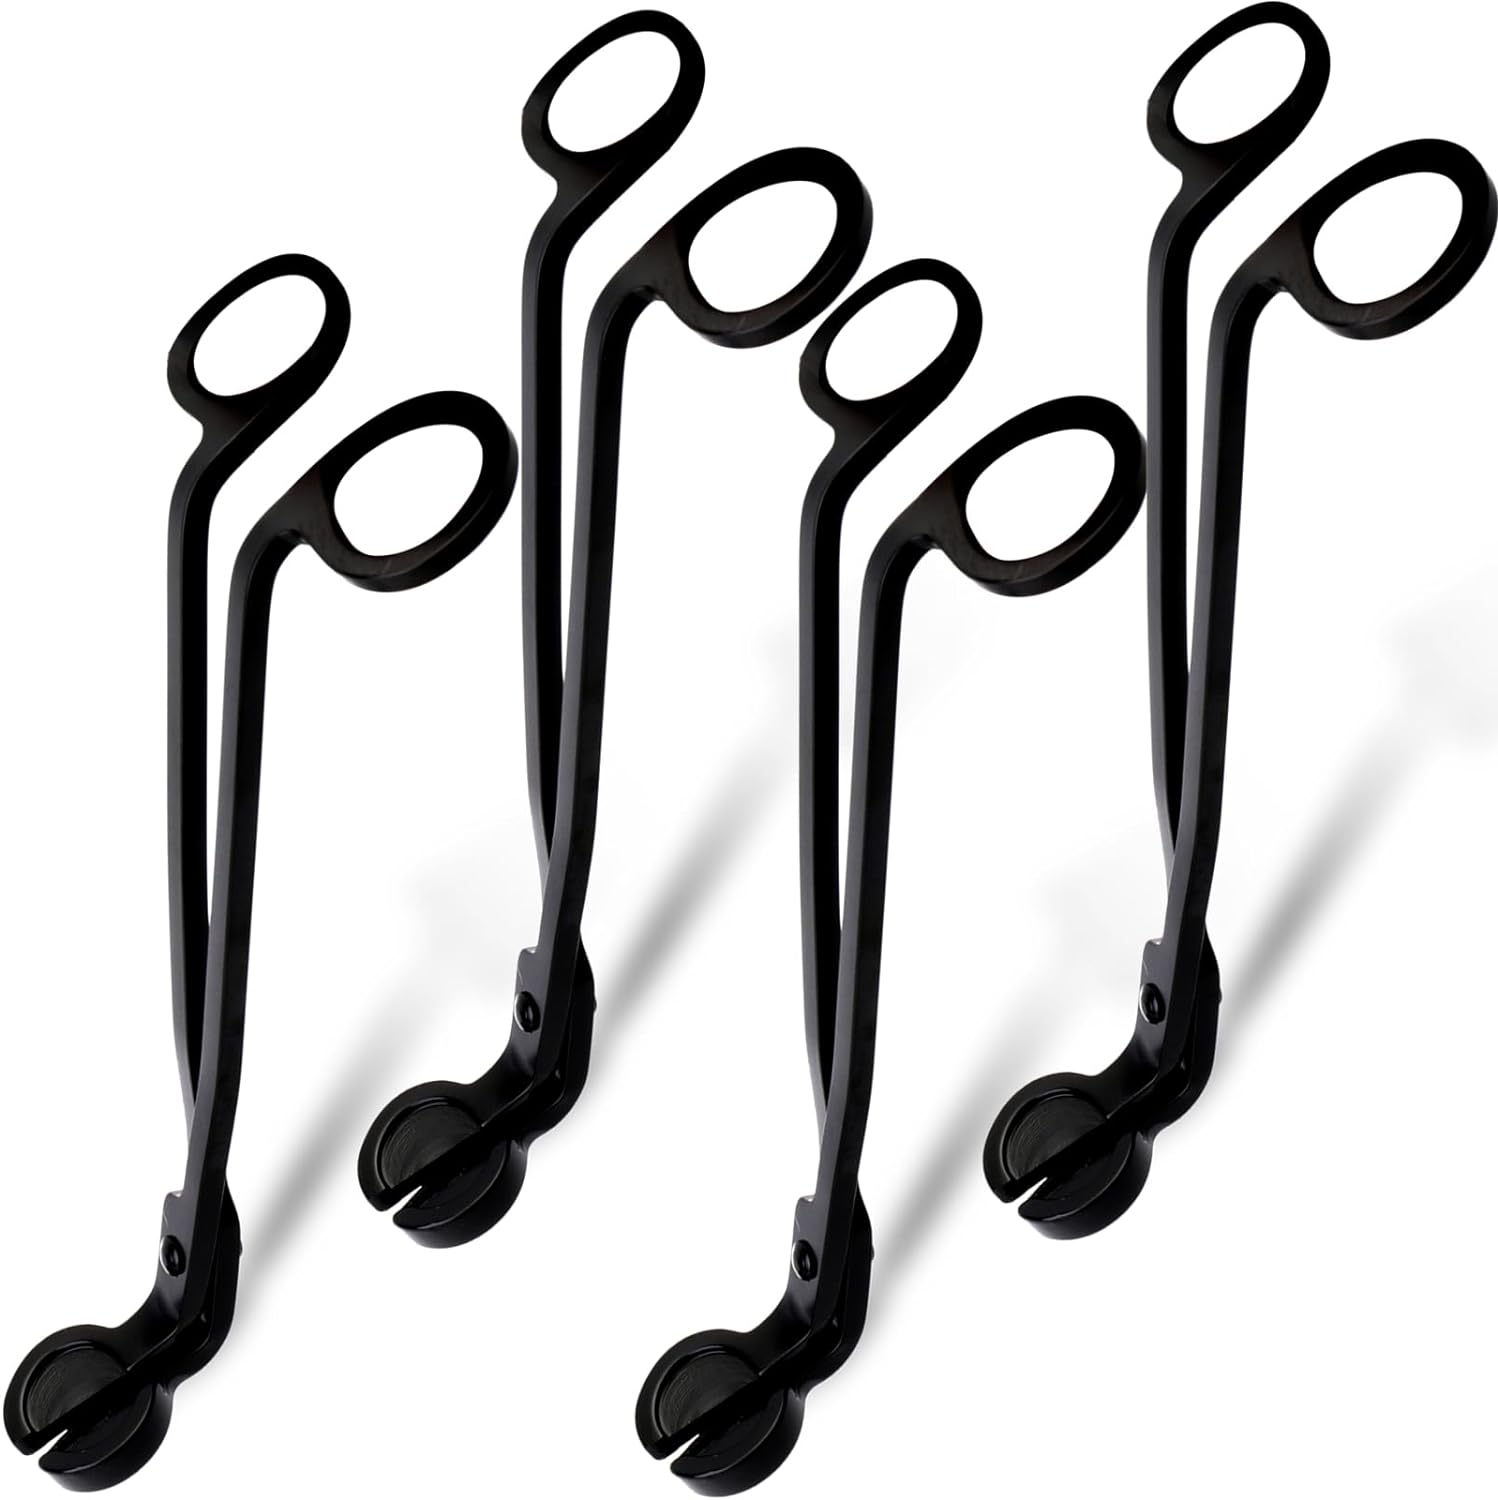 4 Pack Candle Wick Trimmer, Stainless Steel Wick Clipper Cutter, Matte Black Wick Candle Scissor, Reaches Deep Into Candles to Cut Spent Wicks